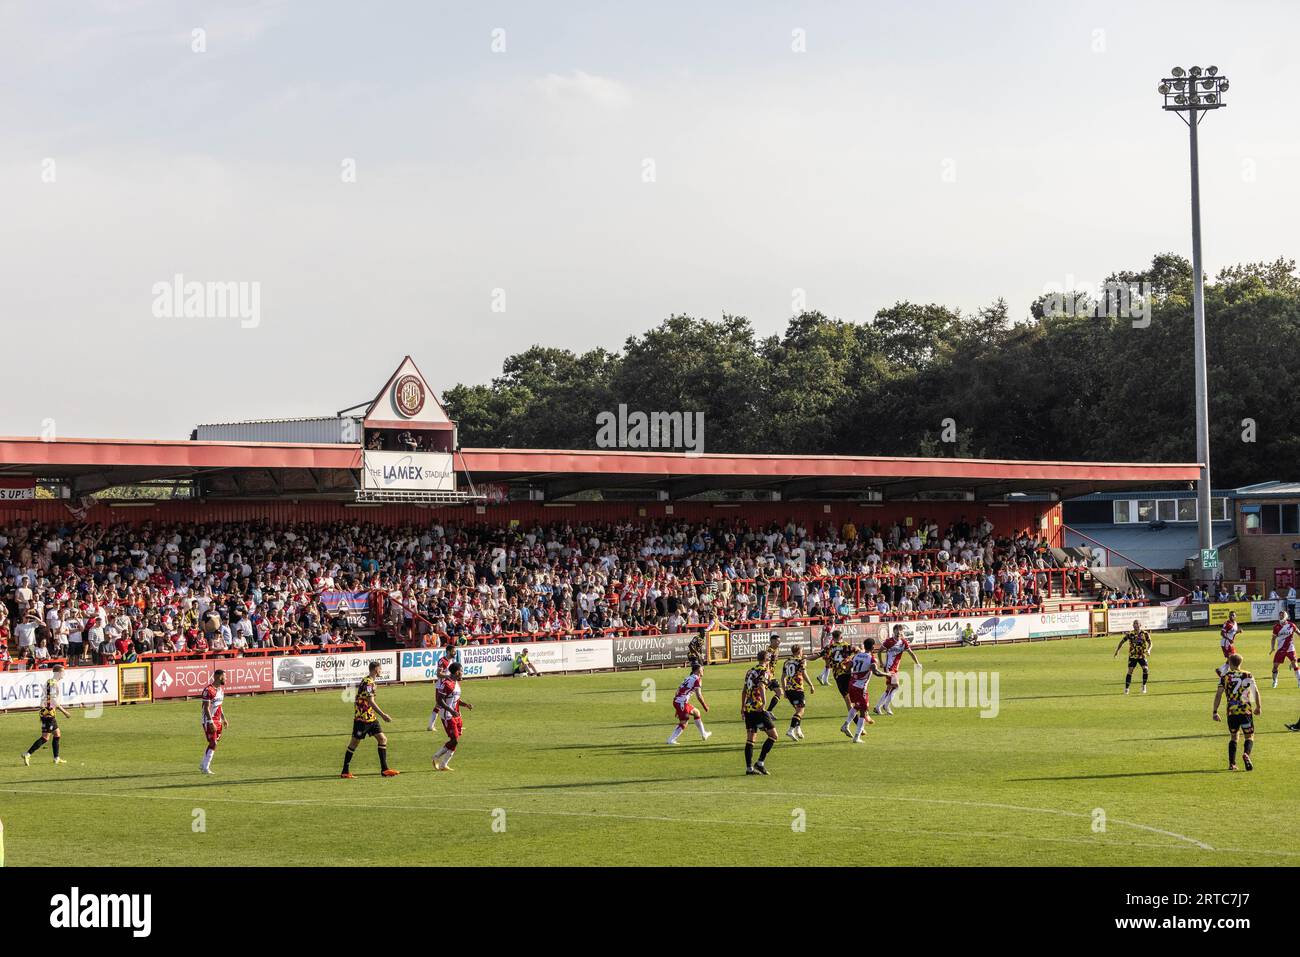 General view of the Lamex Stadium, home of Stevenage Football Club with fans and spectators during match. Stock Photo